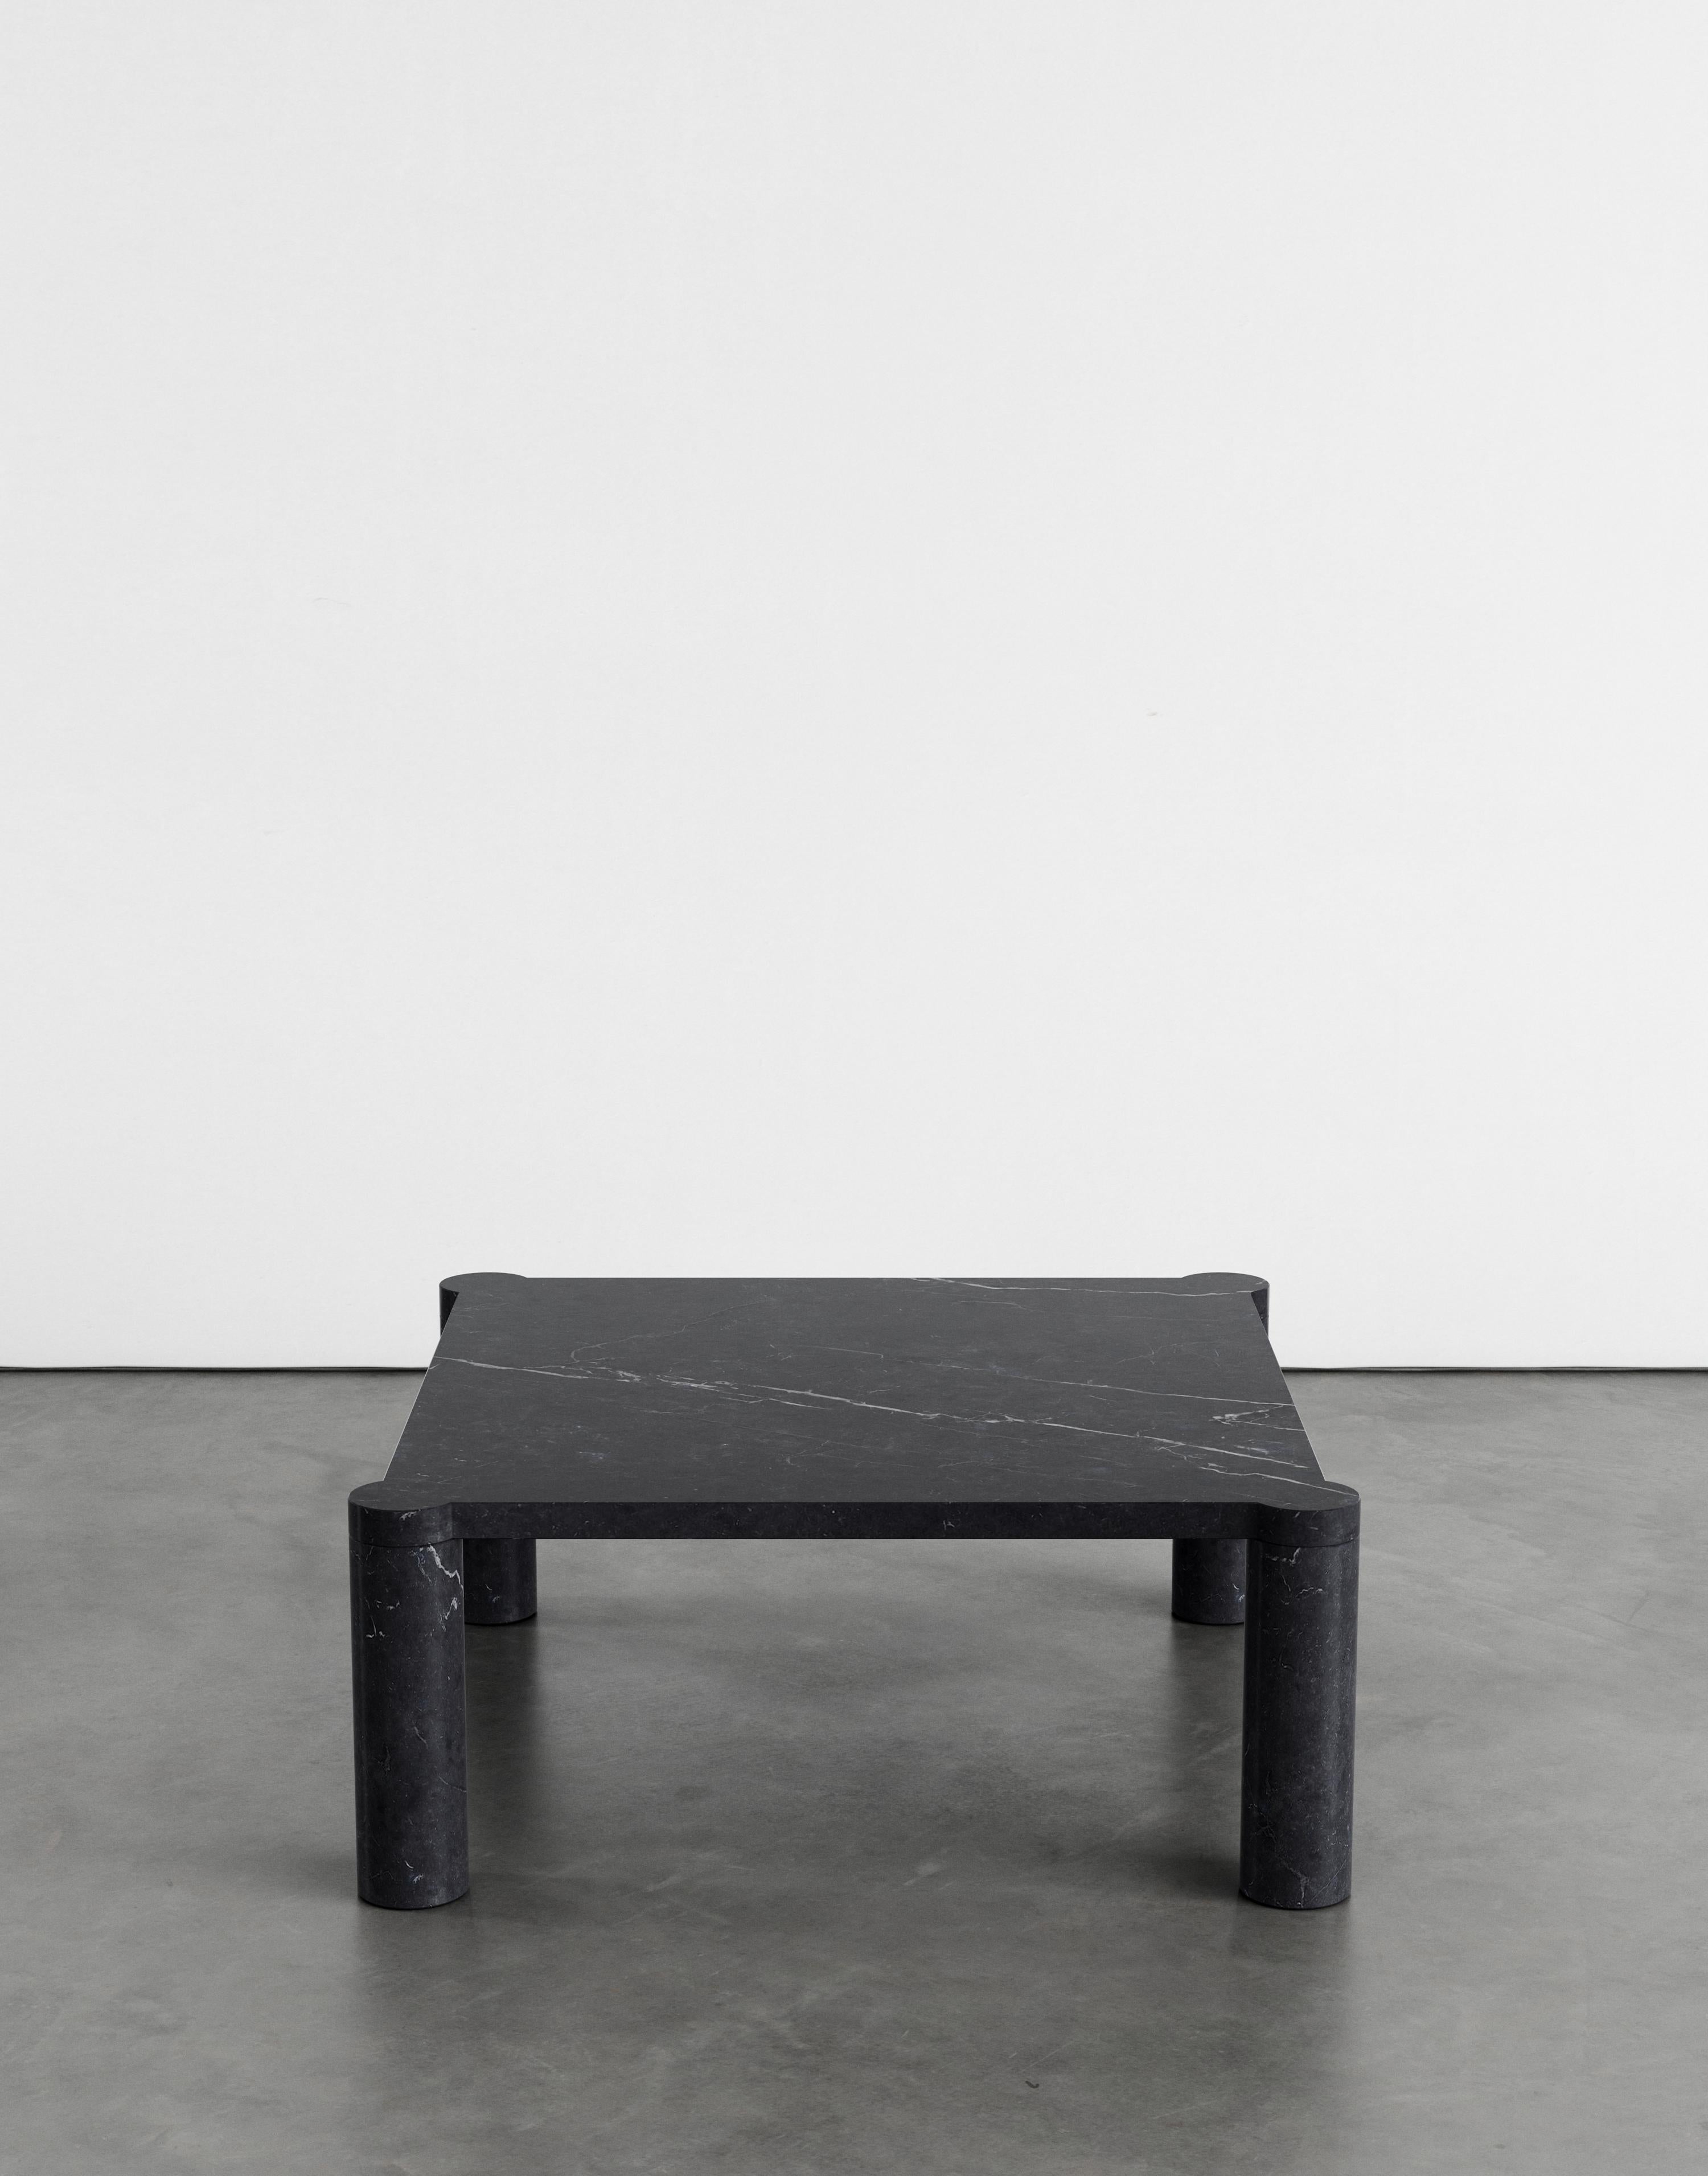 Alessio 80 coffee table by Agglomerati 
Dimensions: D 80 x W 80 x H 33 cm 
Materials: Black Marquina. Available in other stones. 

Agglomerati is a London-based studio creating distinctive stone furniture. Established in 2019 by Australian